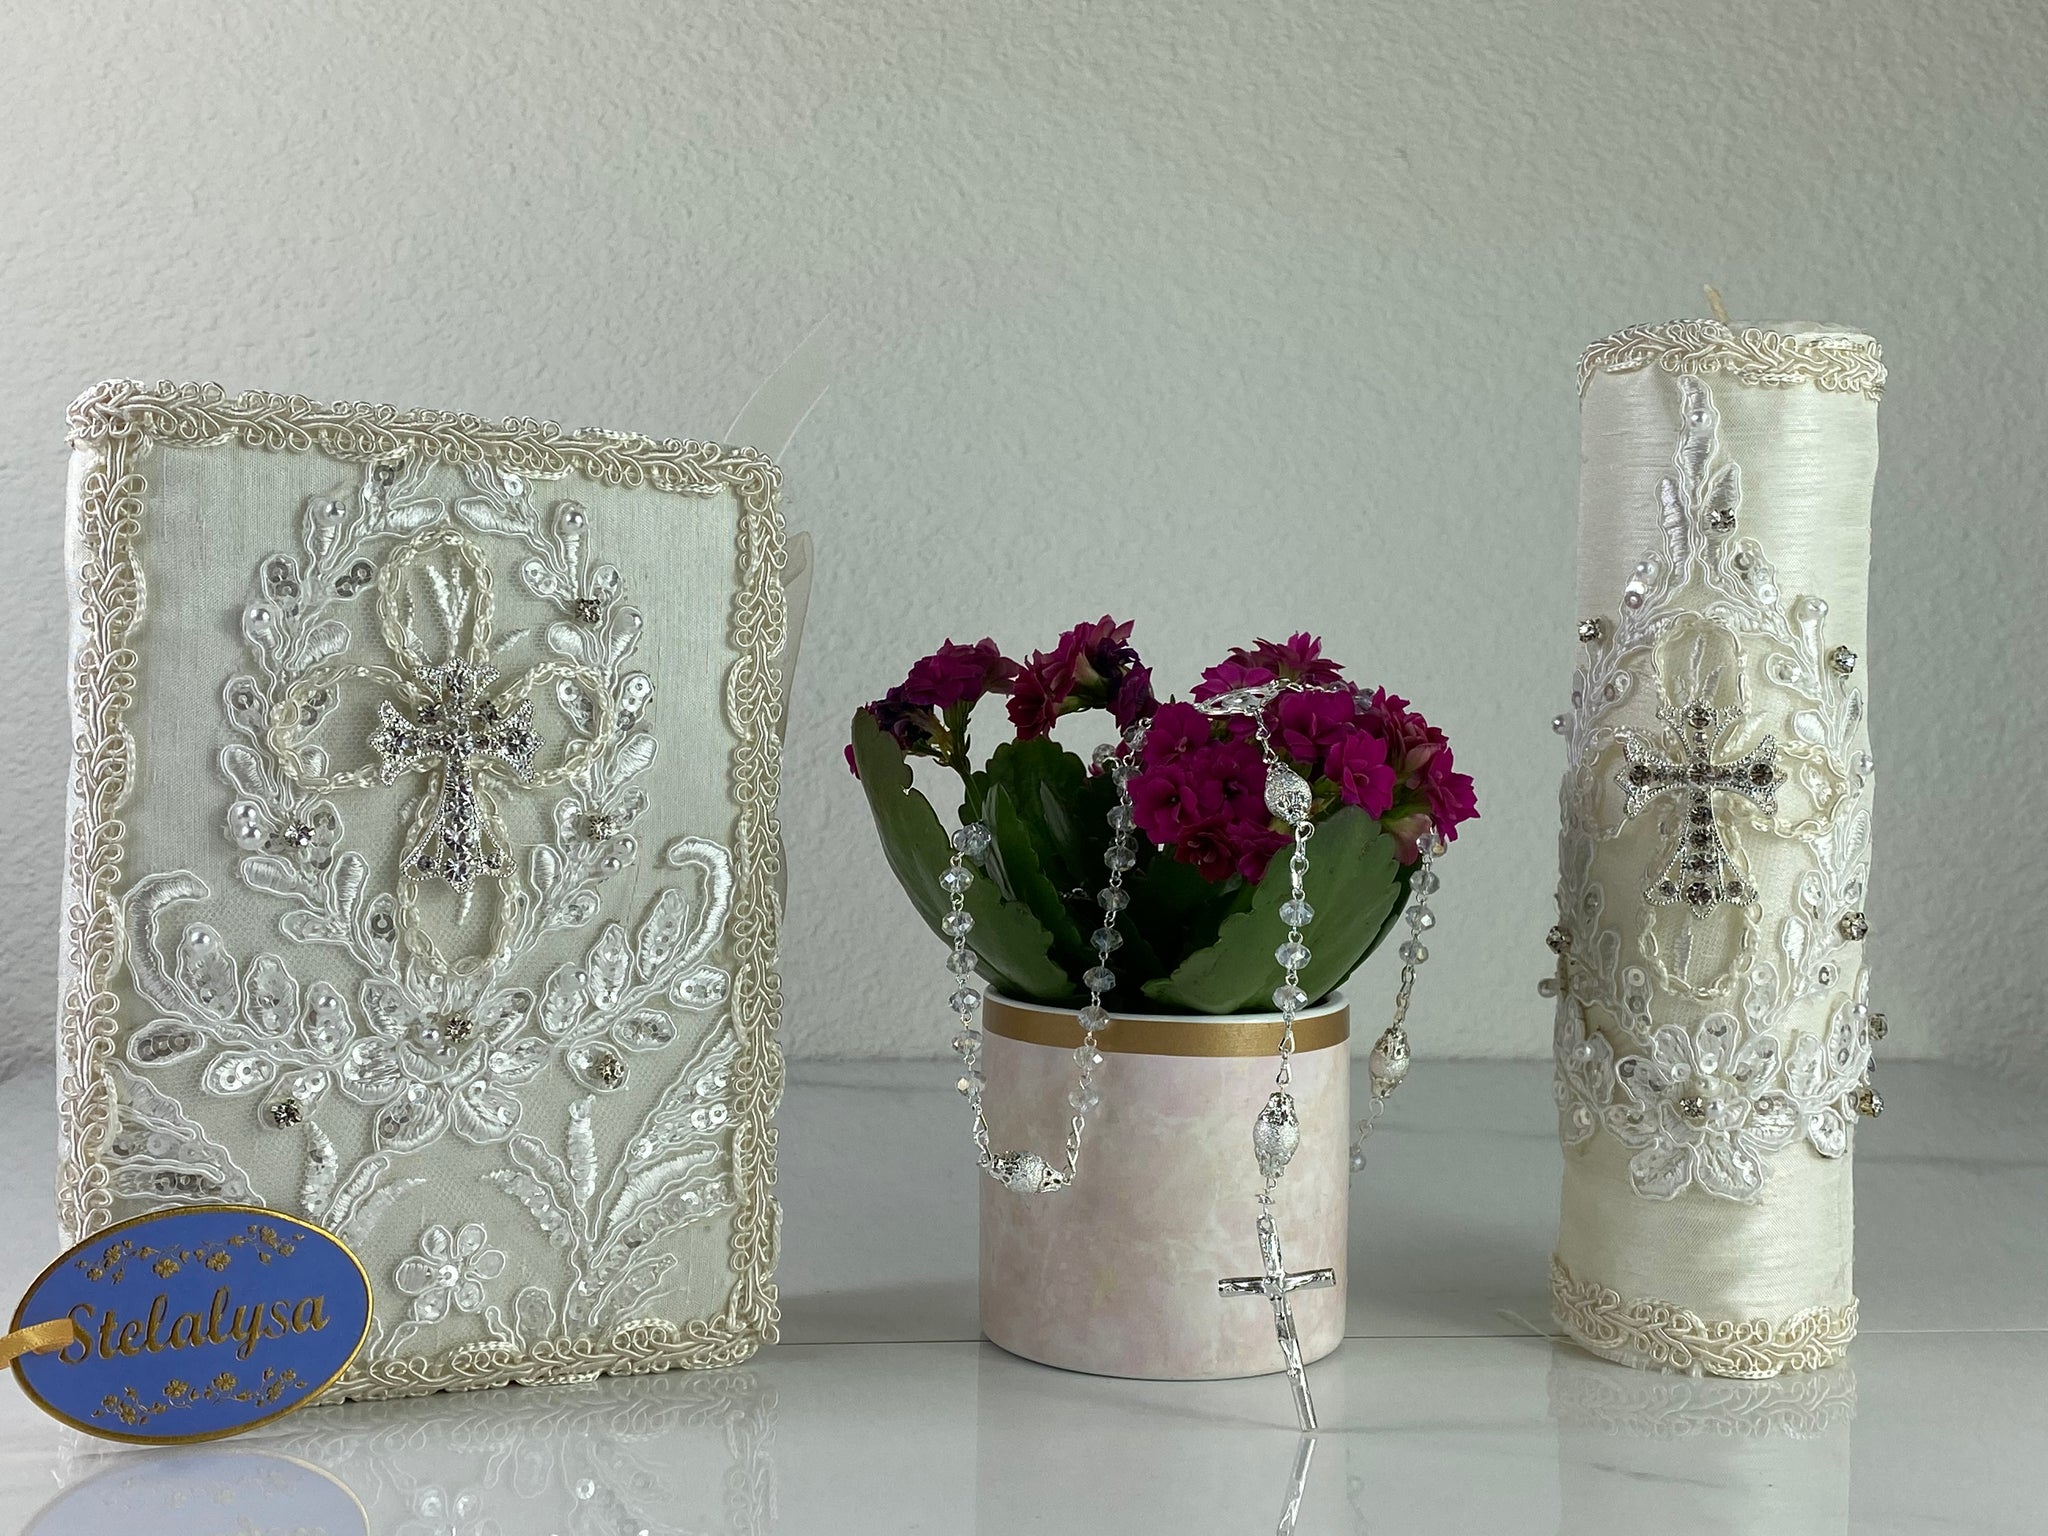 This ivory Bible Set - candle and bible is handmade and made using satin.  It is elegantly designed with lace, rhinestones, and pearls.  Each piece has a beautiful cross.  An elegant rosary complements this set.  The rosary is 16.5 in. long and Bible is 6.5 in. by 4.5 in. and the candles approximately the same height.  The Bible includes the Old and New Testament in English. 